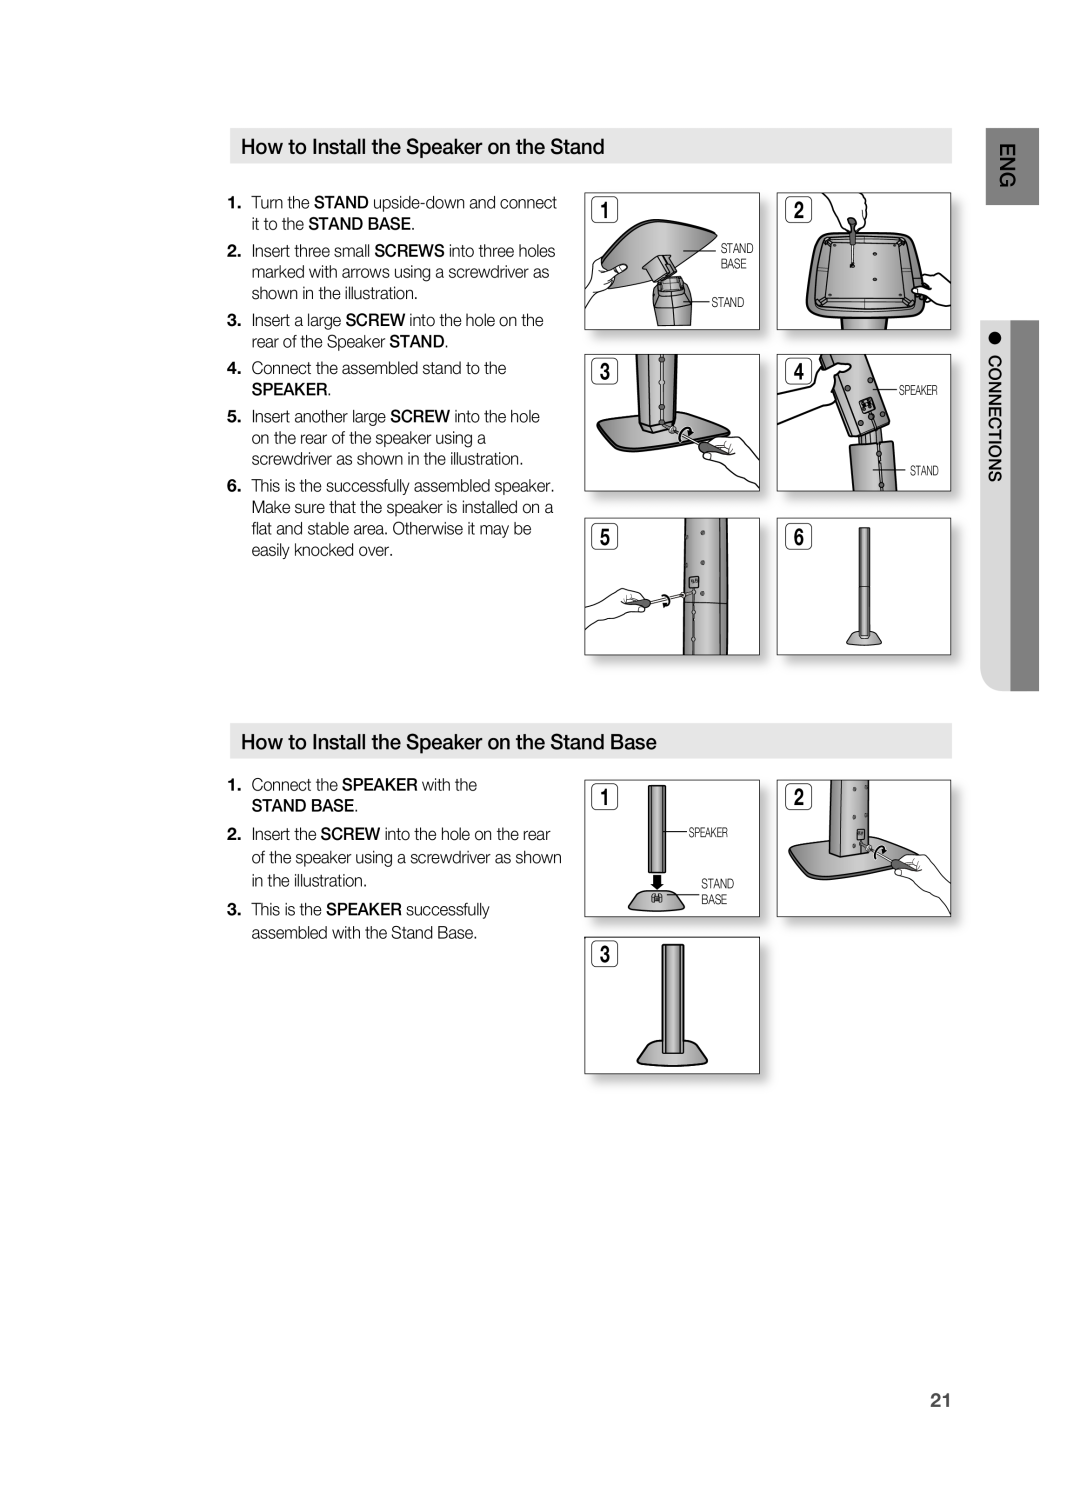 Samsung HT-TWZ415 user manual How to Install the Speaker on the Stand Base 